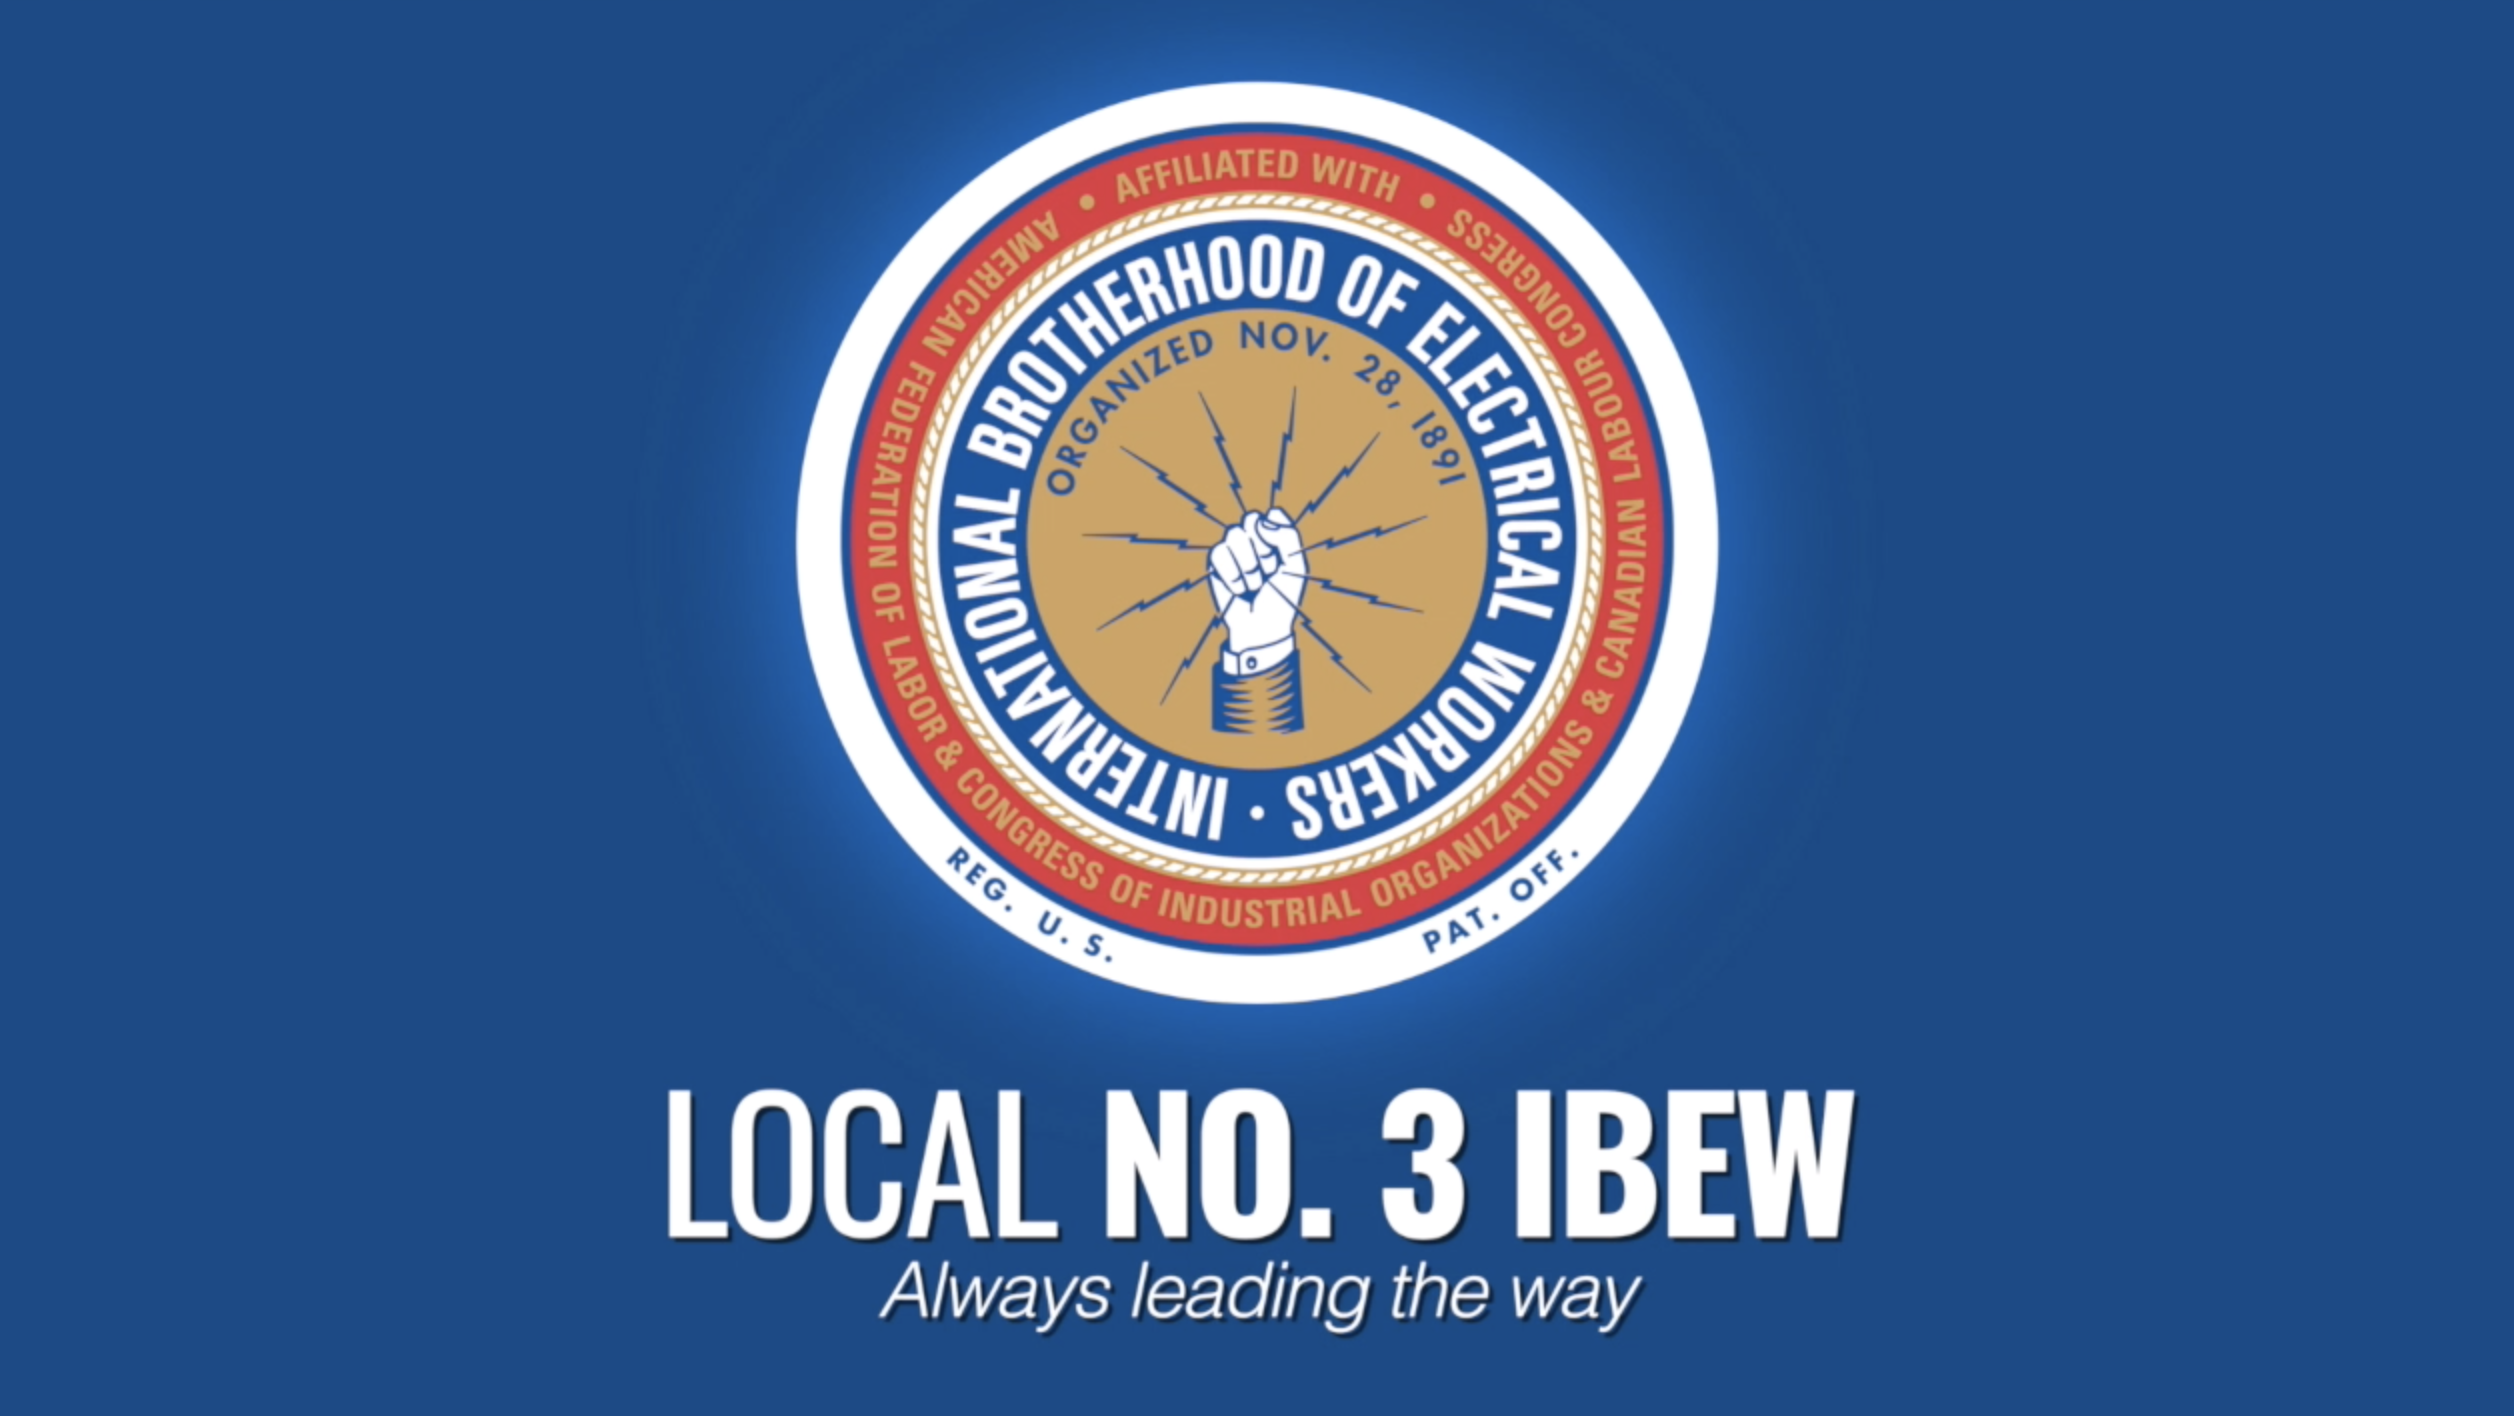 special-update-on-covid-19-outbreak-response-local-union-no-3-ibew